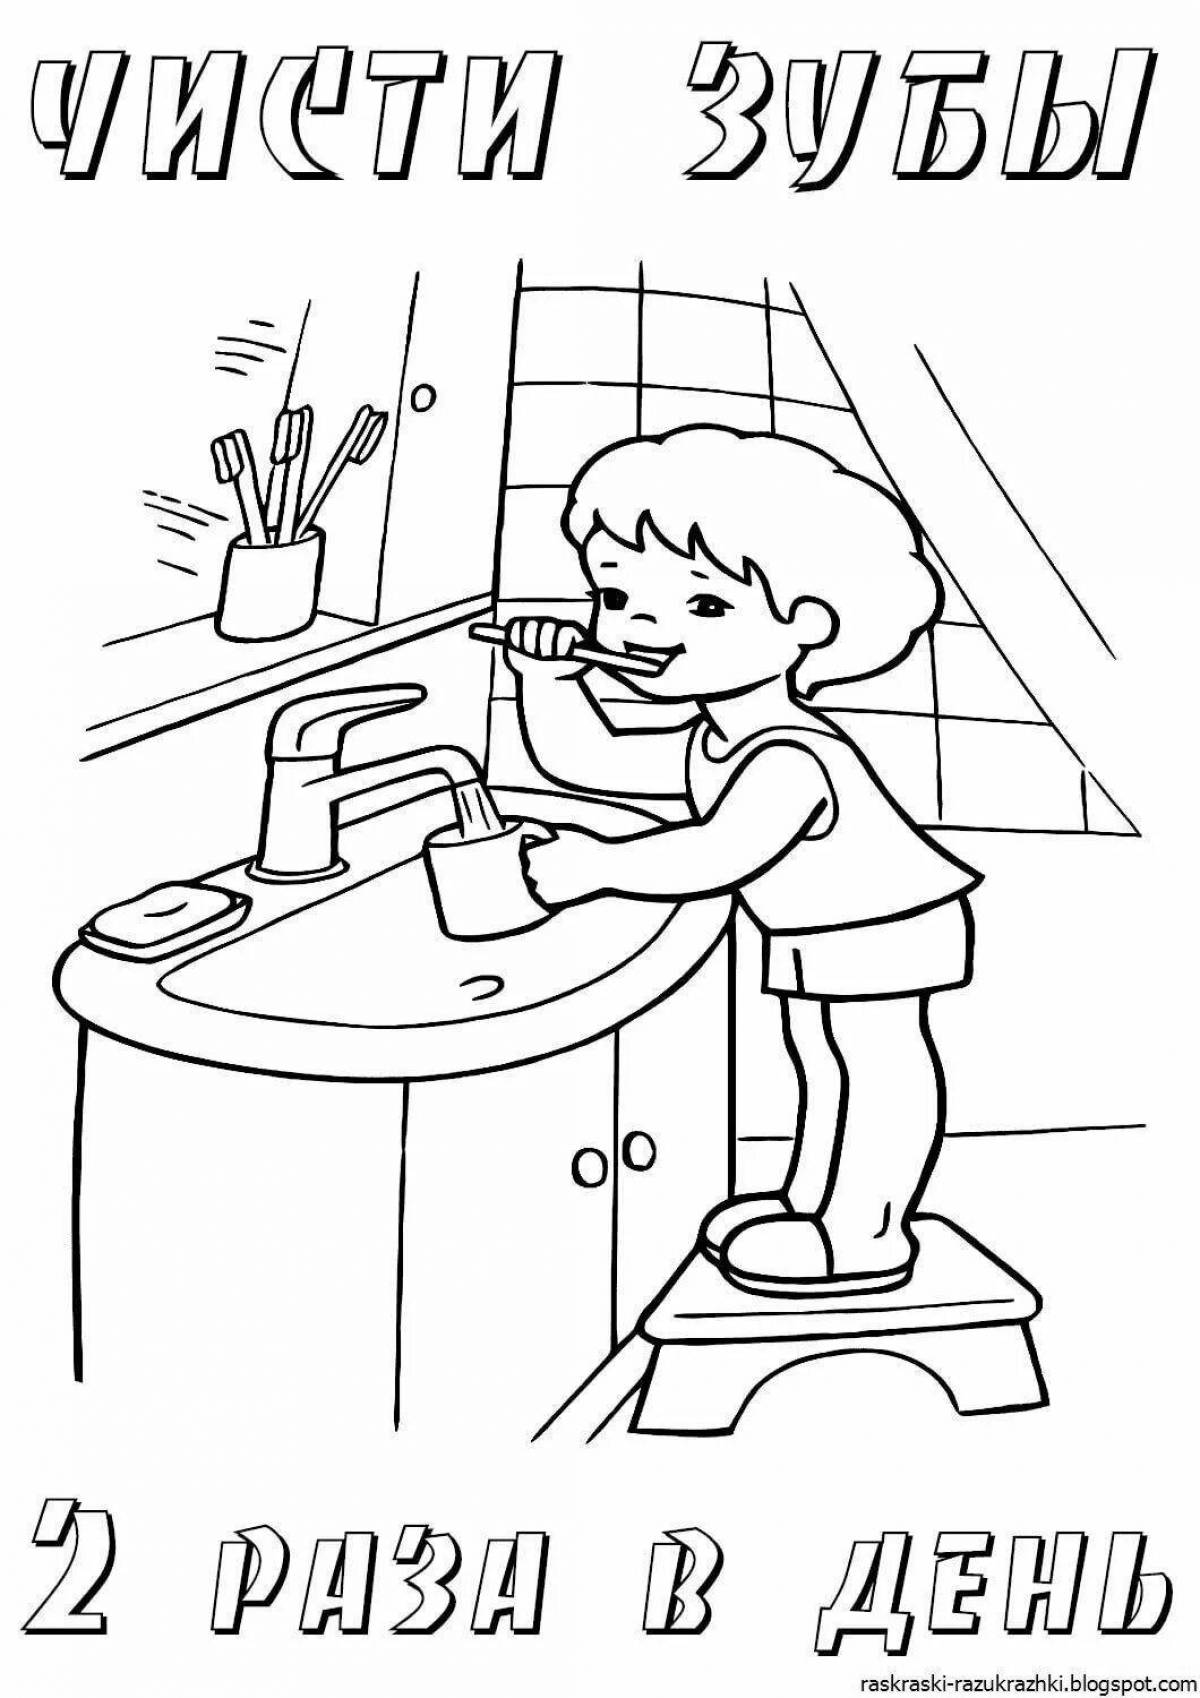 Fun coloring book about lifestyle grade 3